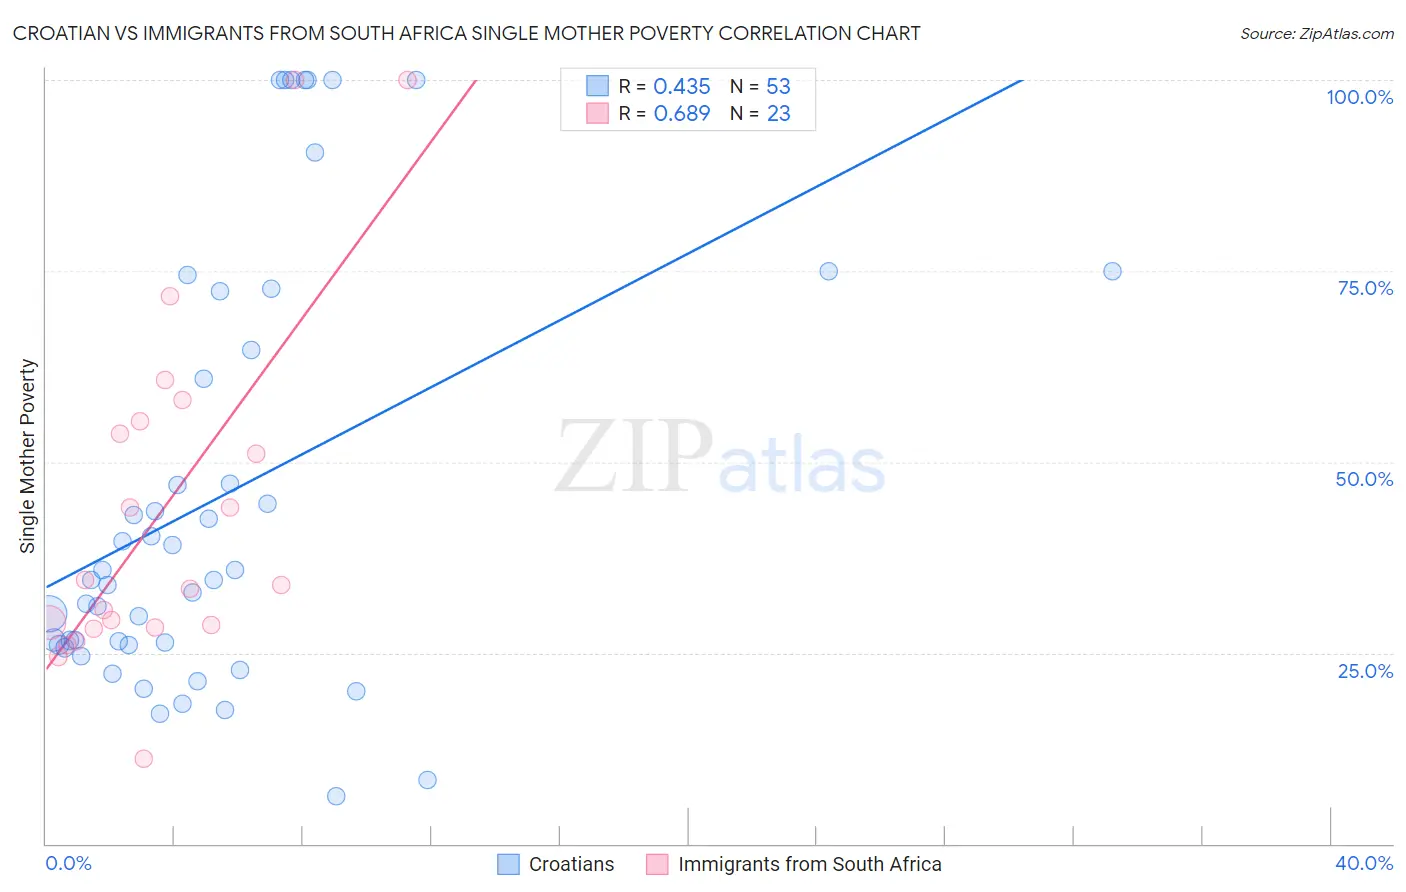 Croatian vs Immigrants from South Africa Single Mother Poverty